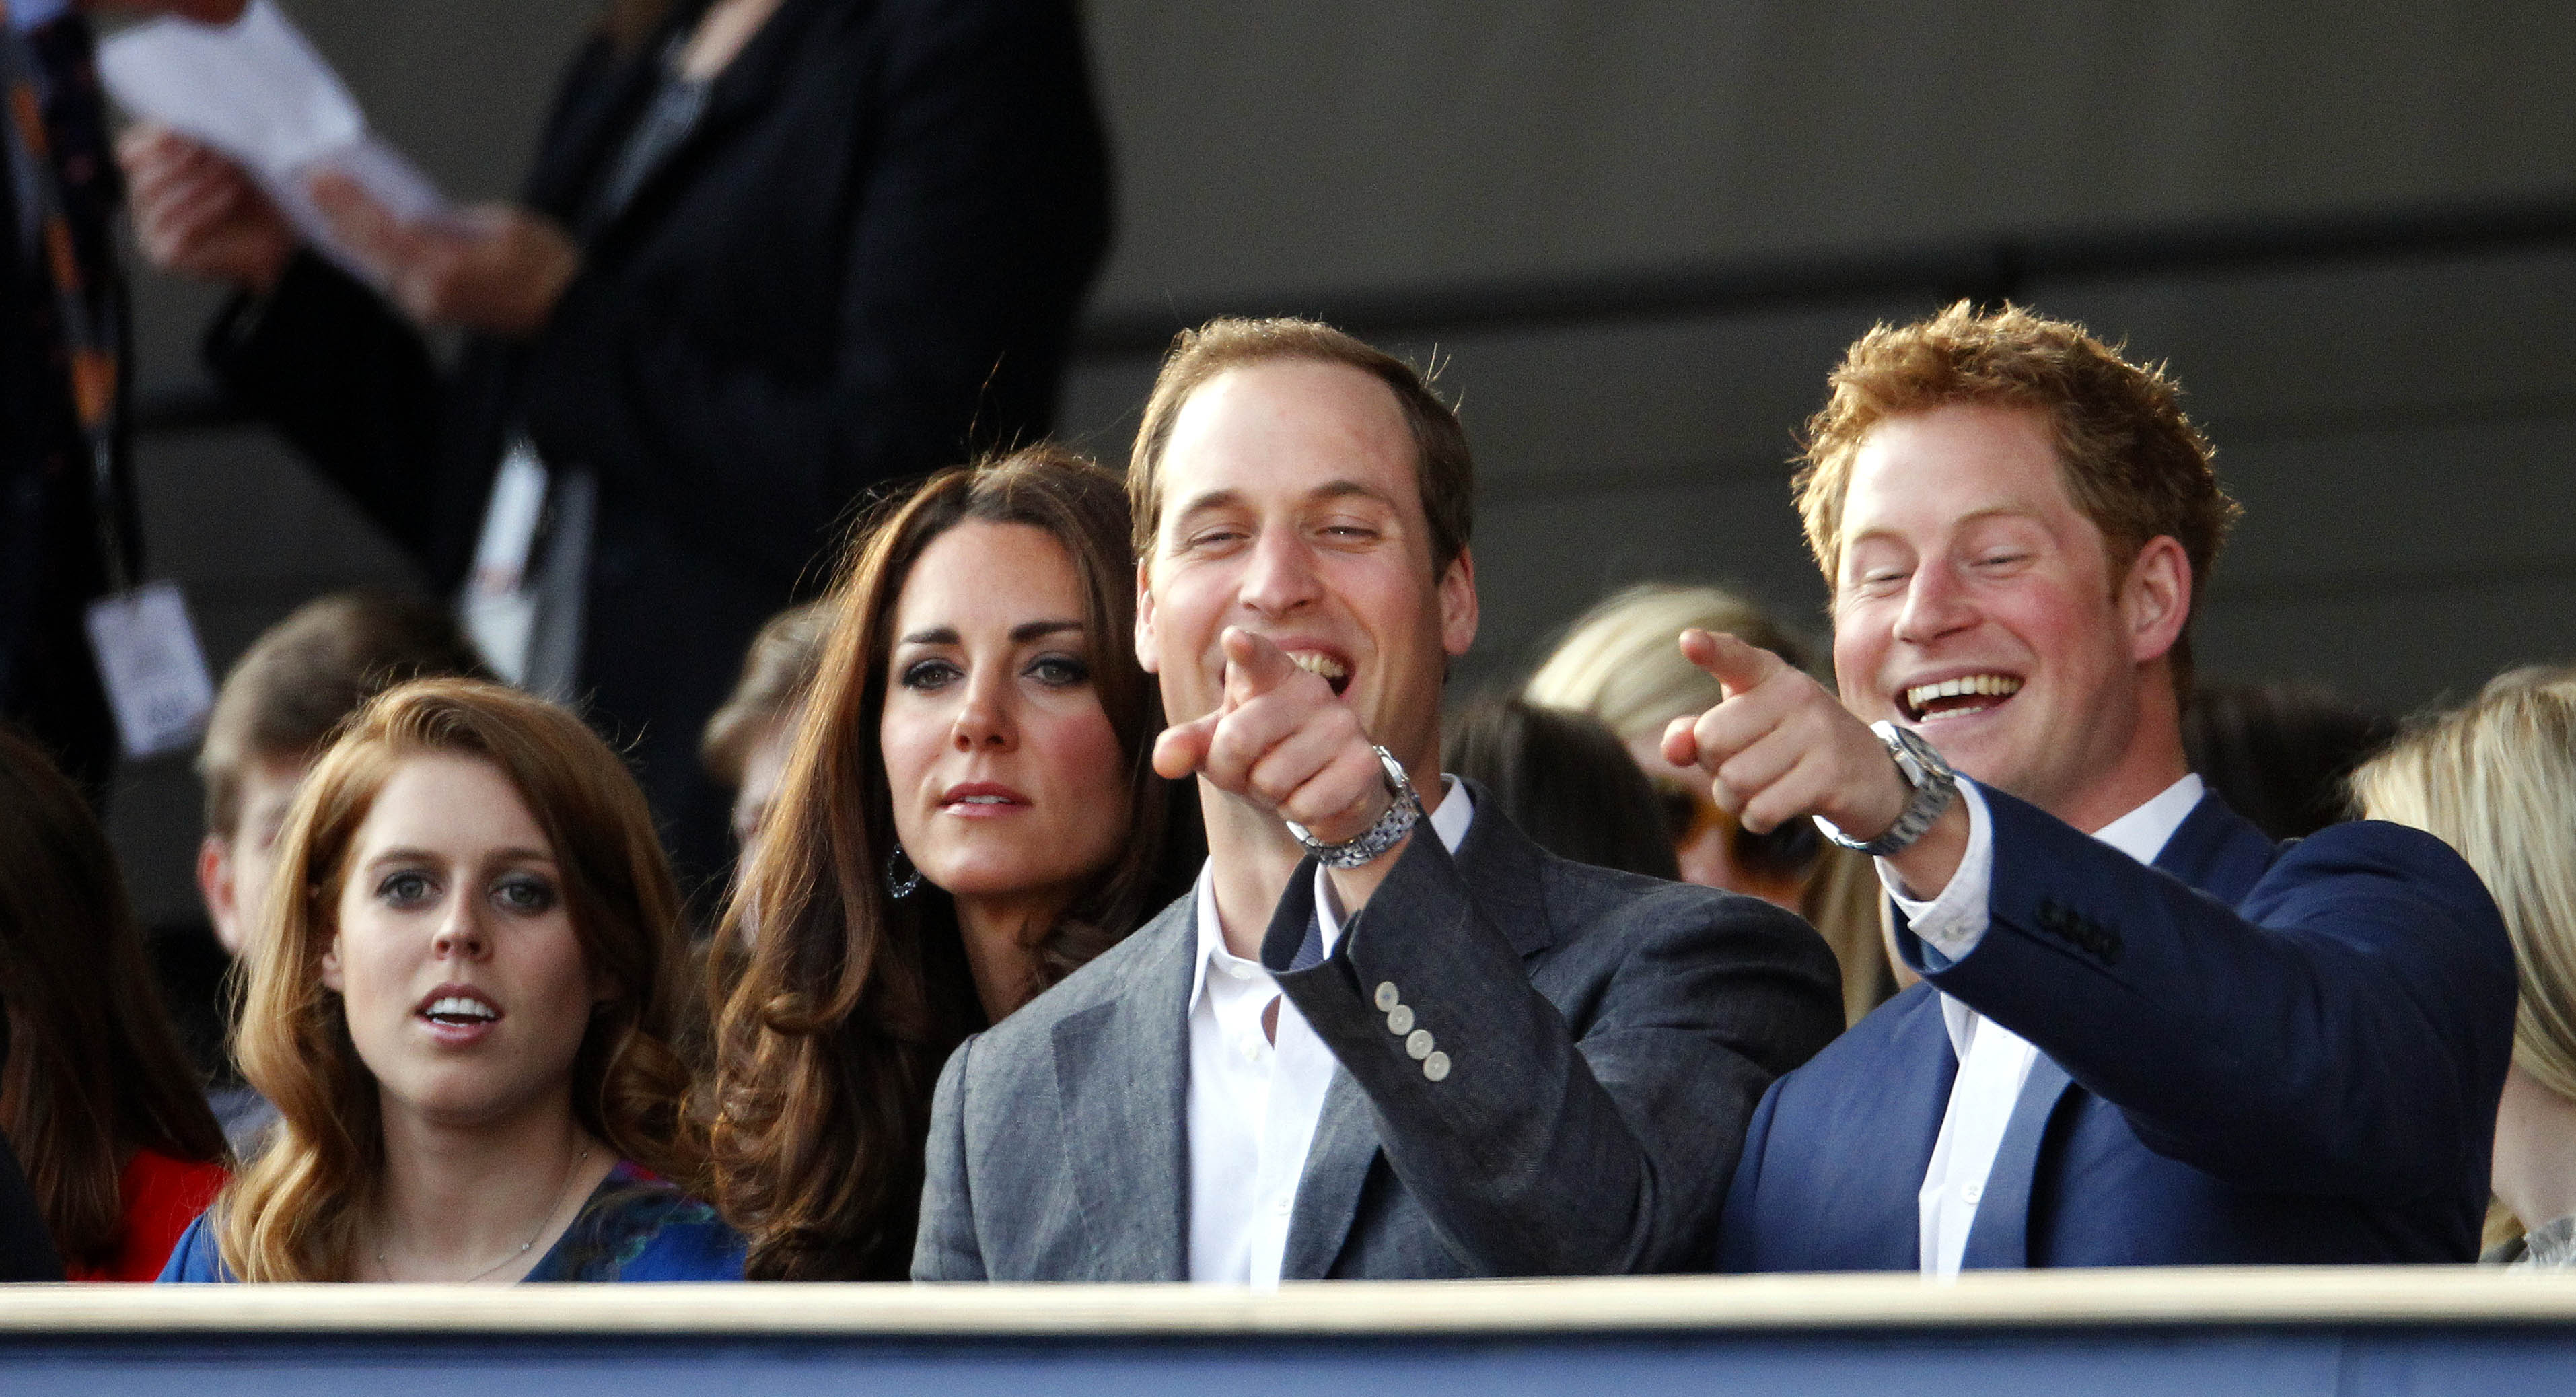 Prince-William-Prince-Harry-pointed-together-beside-Princess.jpg